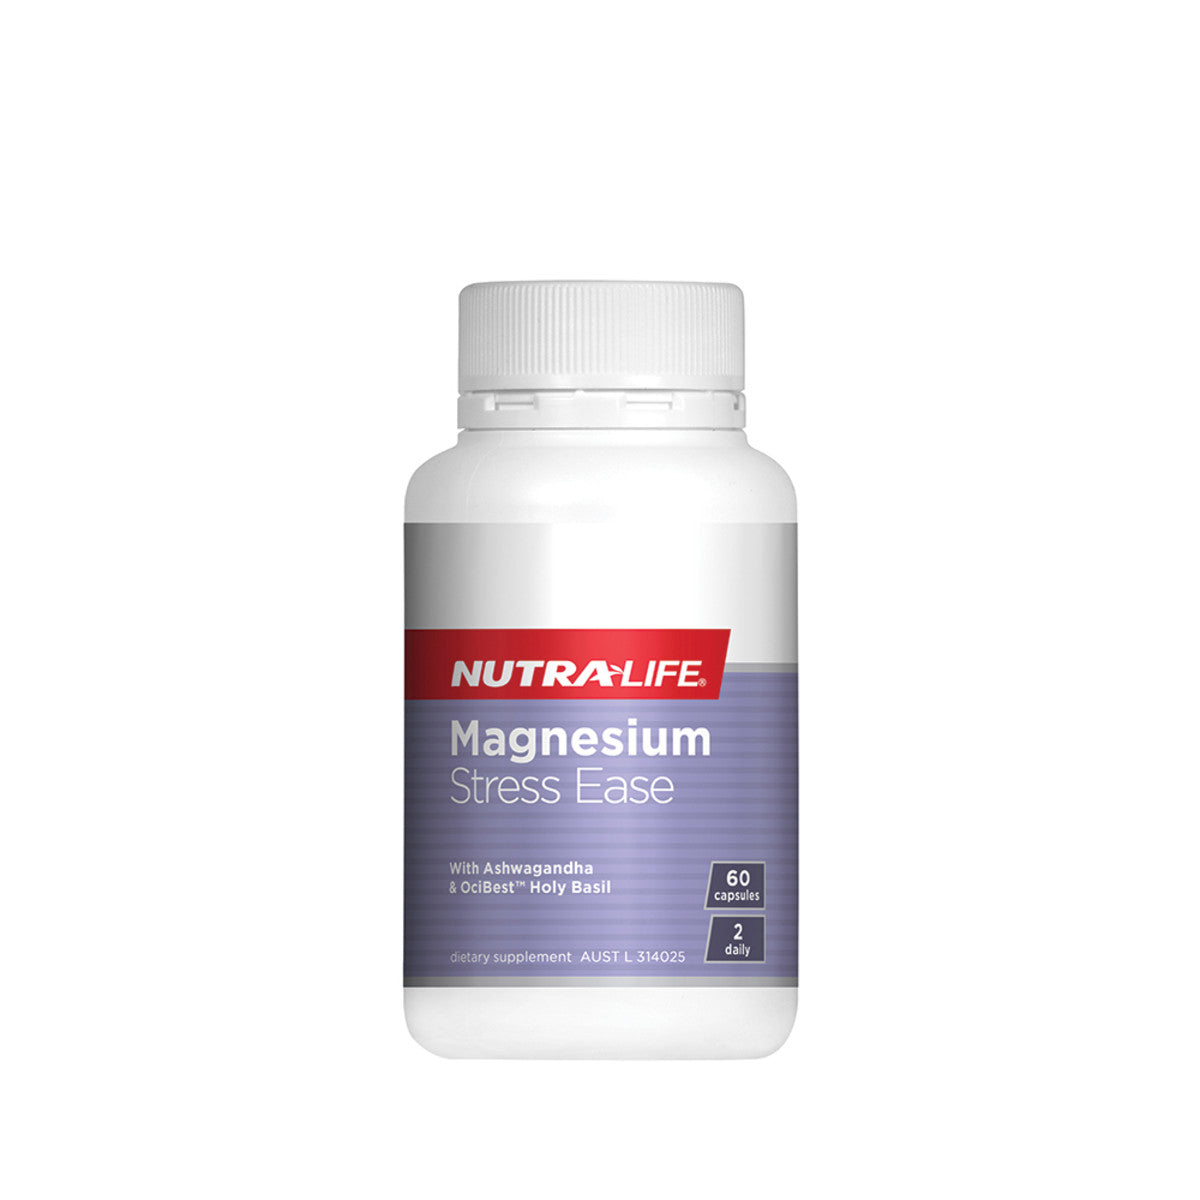 NutraLife - Magnesium Stress Ease